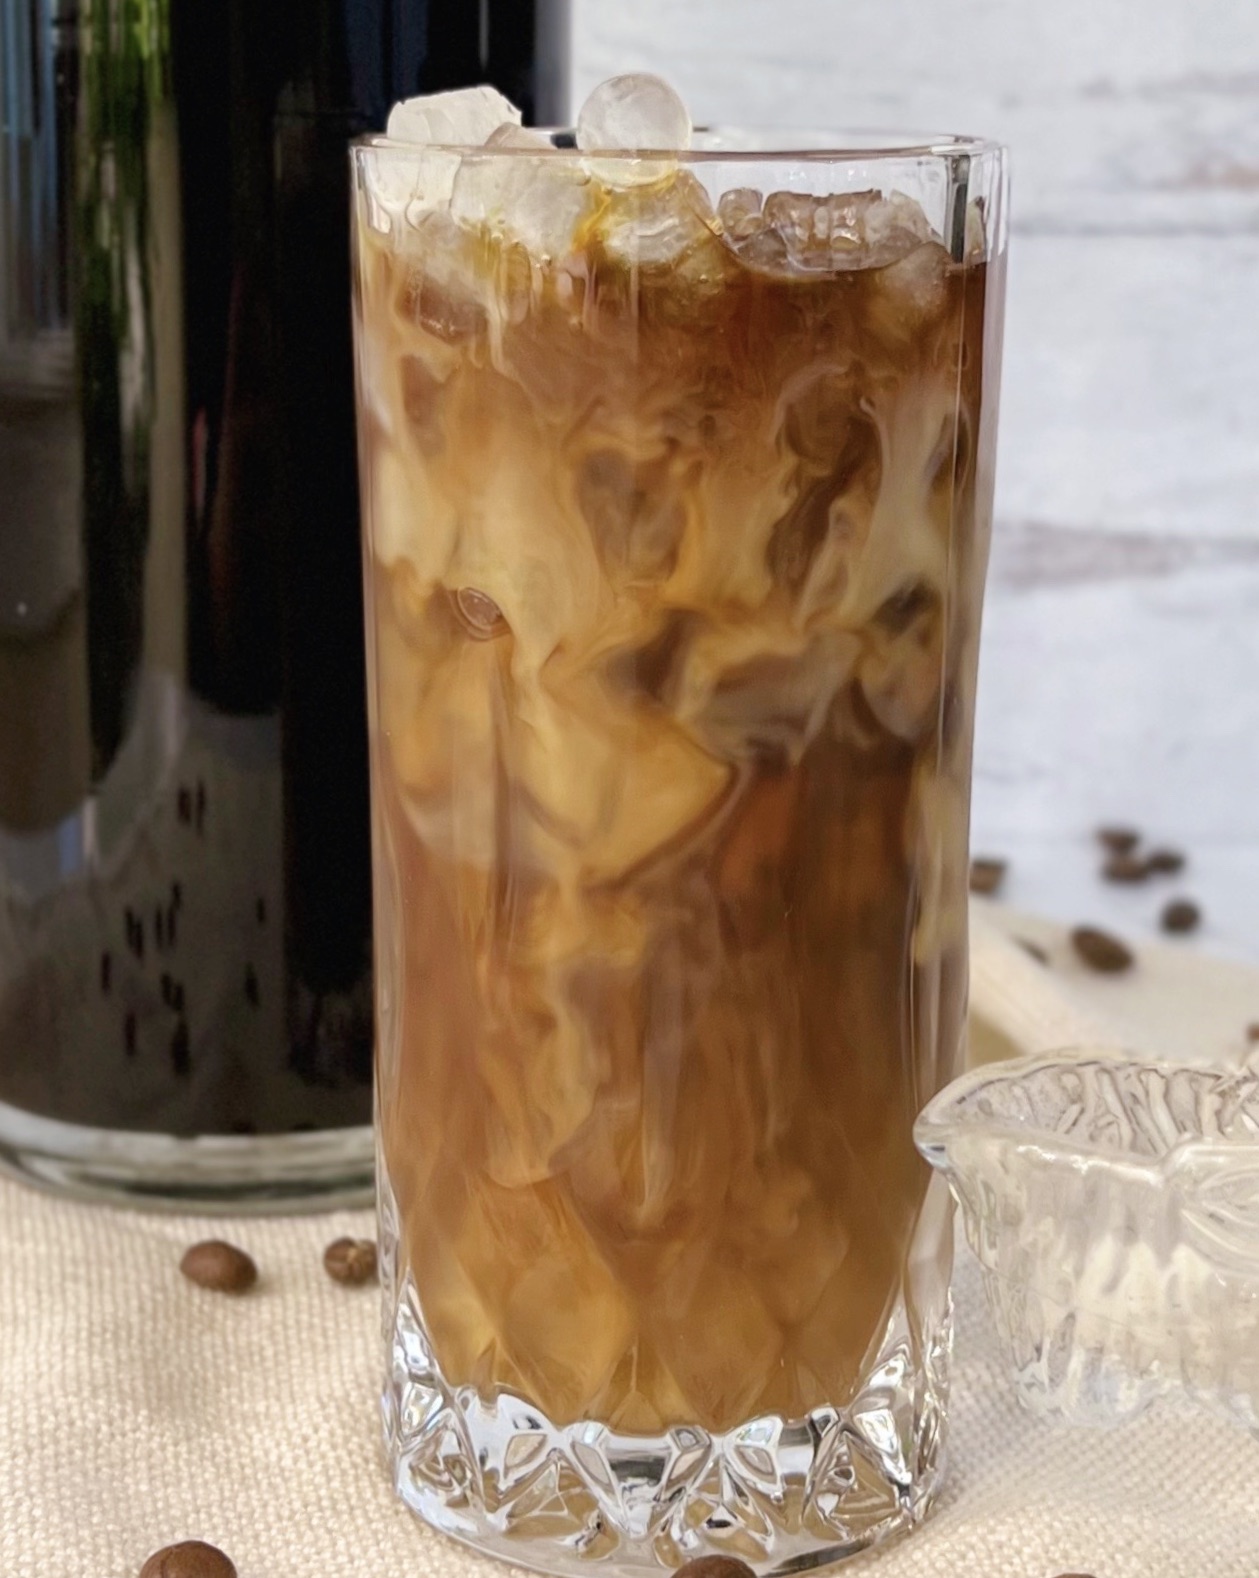 New Orleans Cold-Brew Iced Coffee Recipe - Reily Products